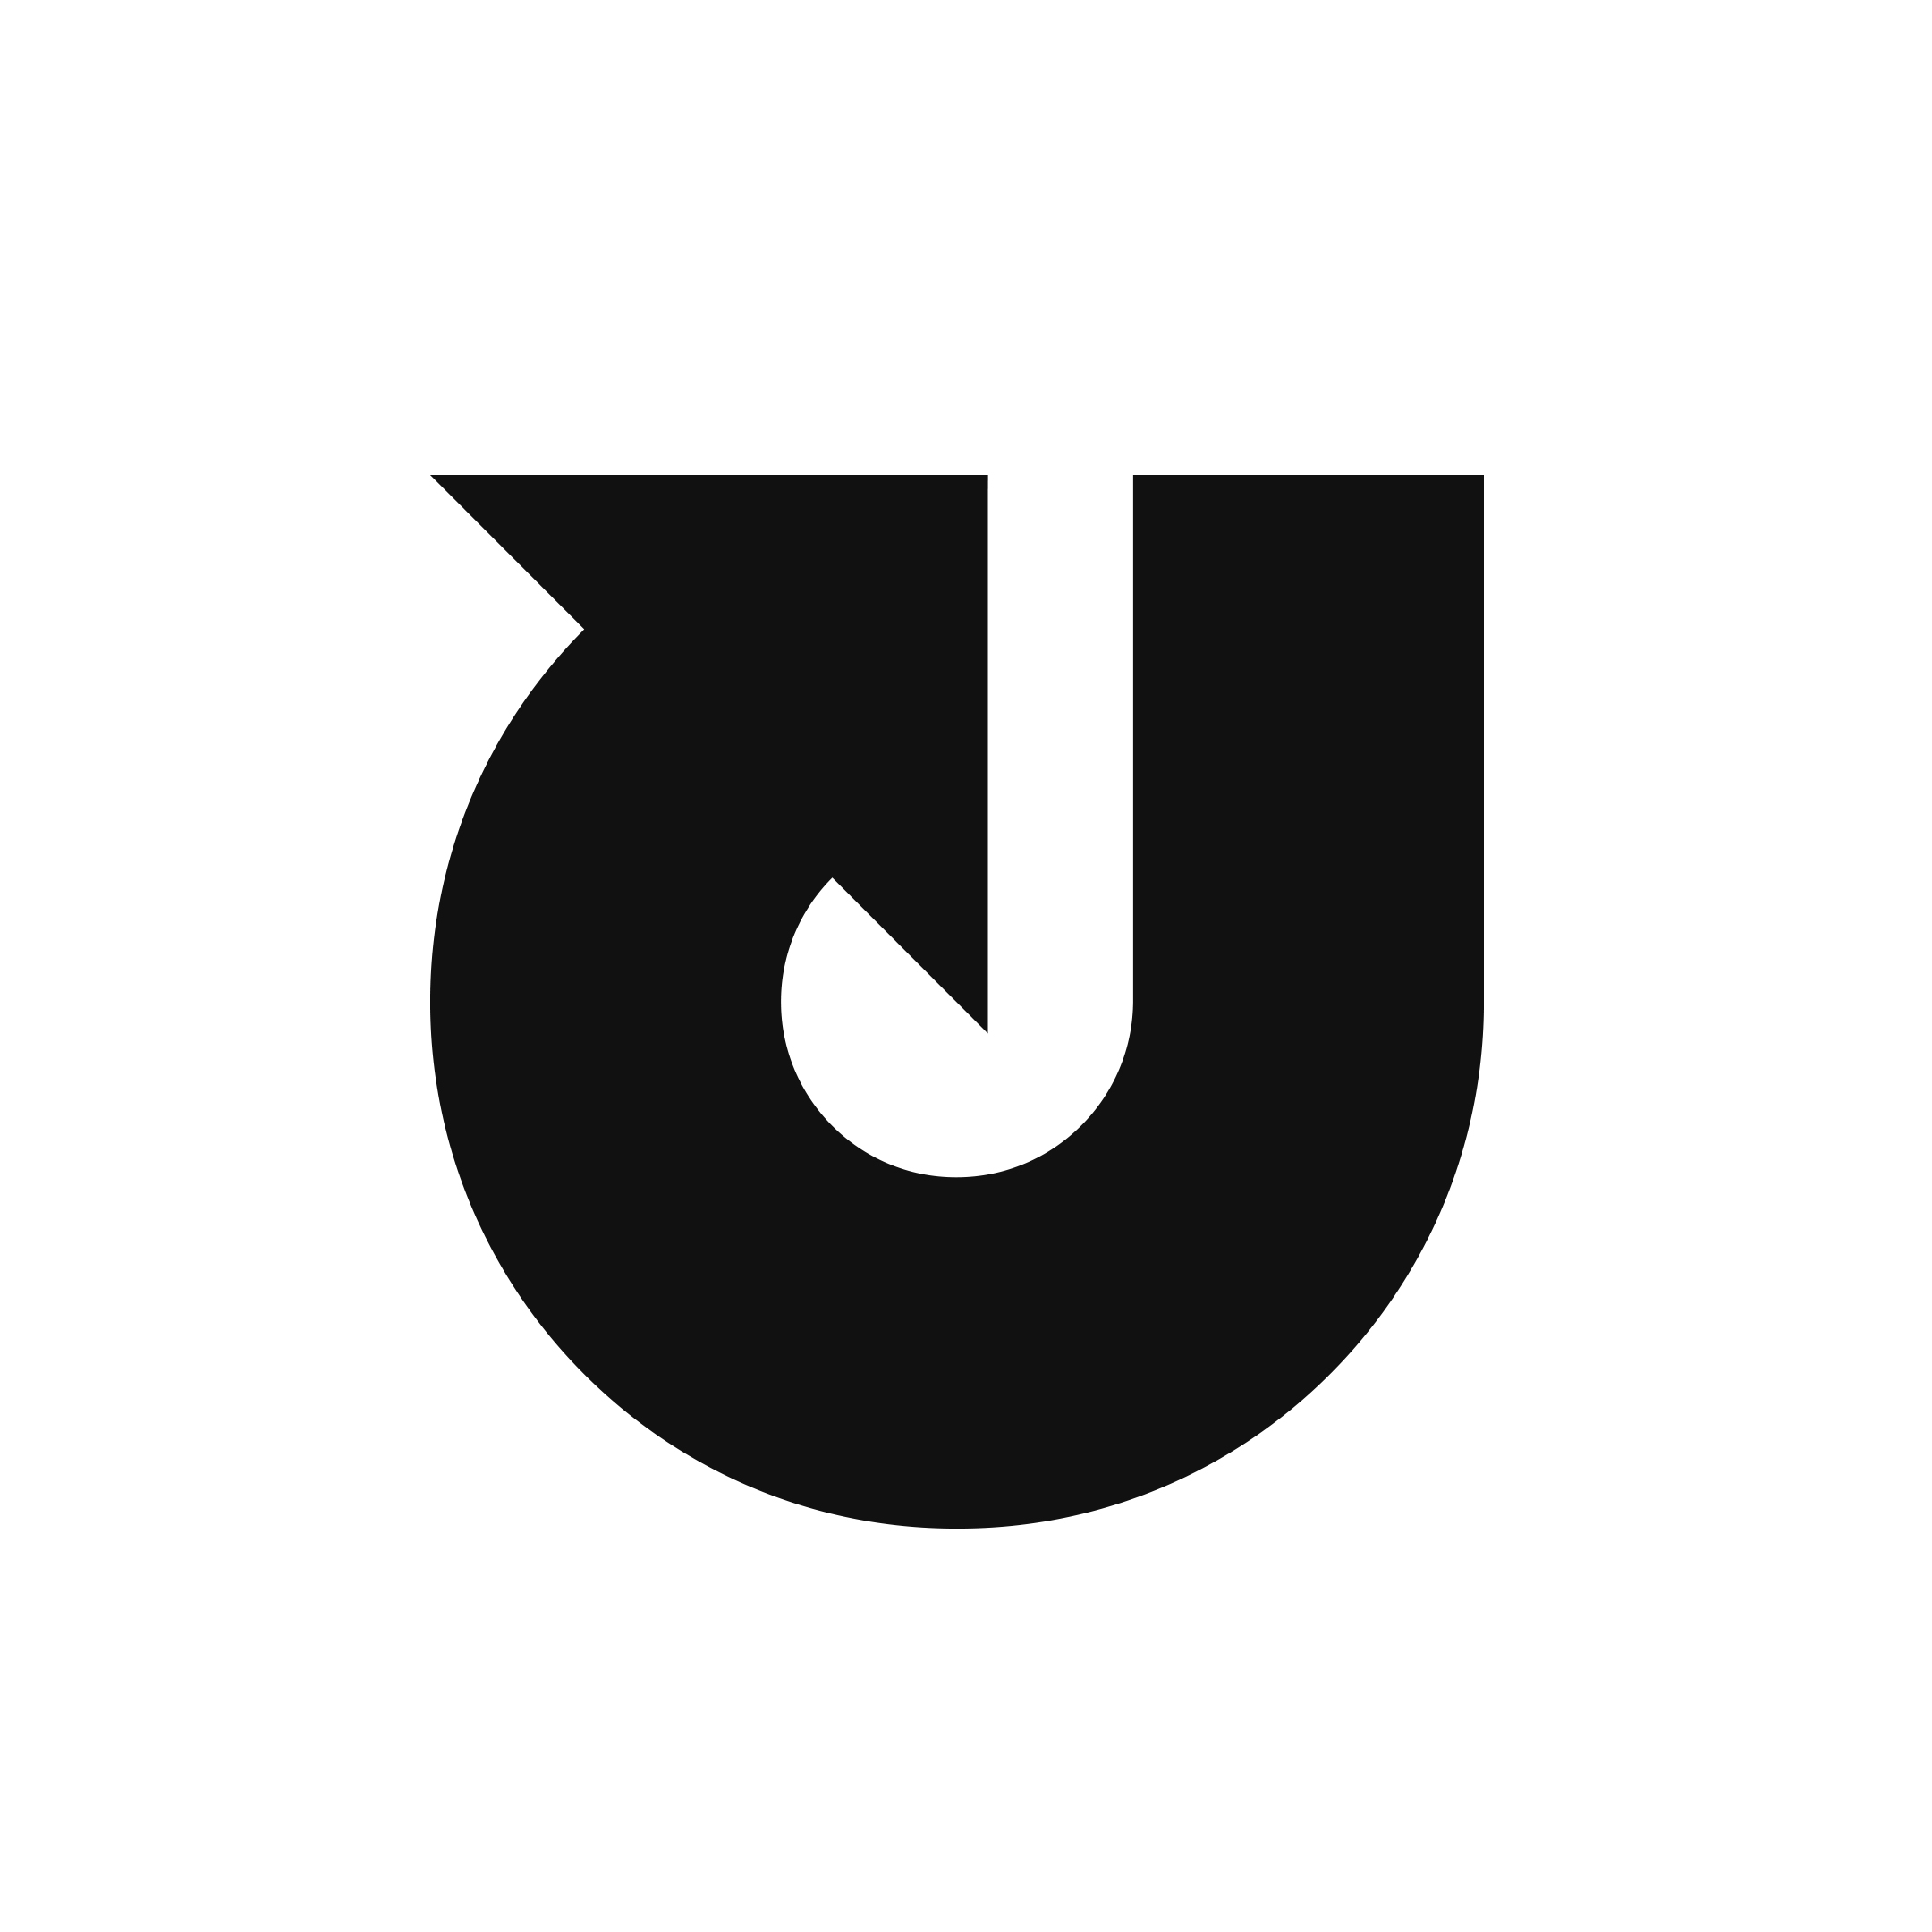 Letter U + Arrow logo design by logo designer Freelance for your inspiration and for the worlds largest logo competition